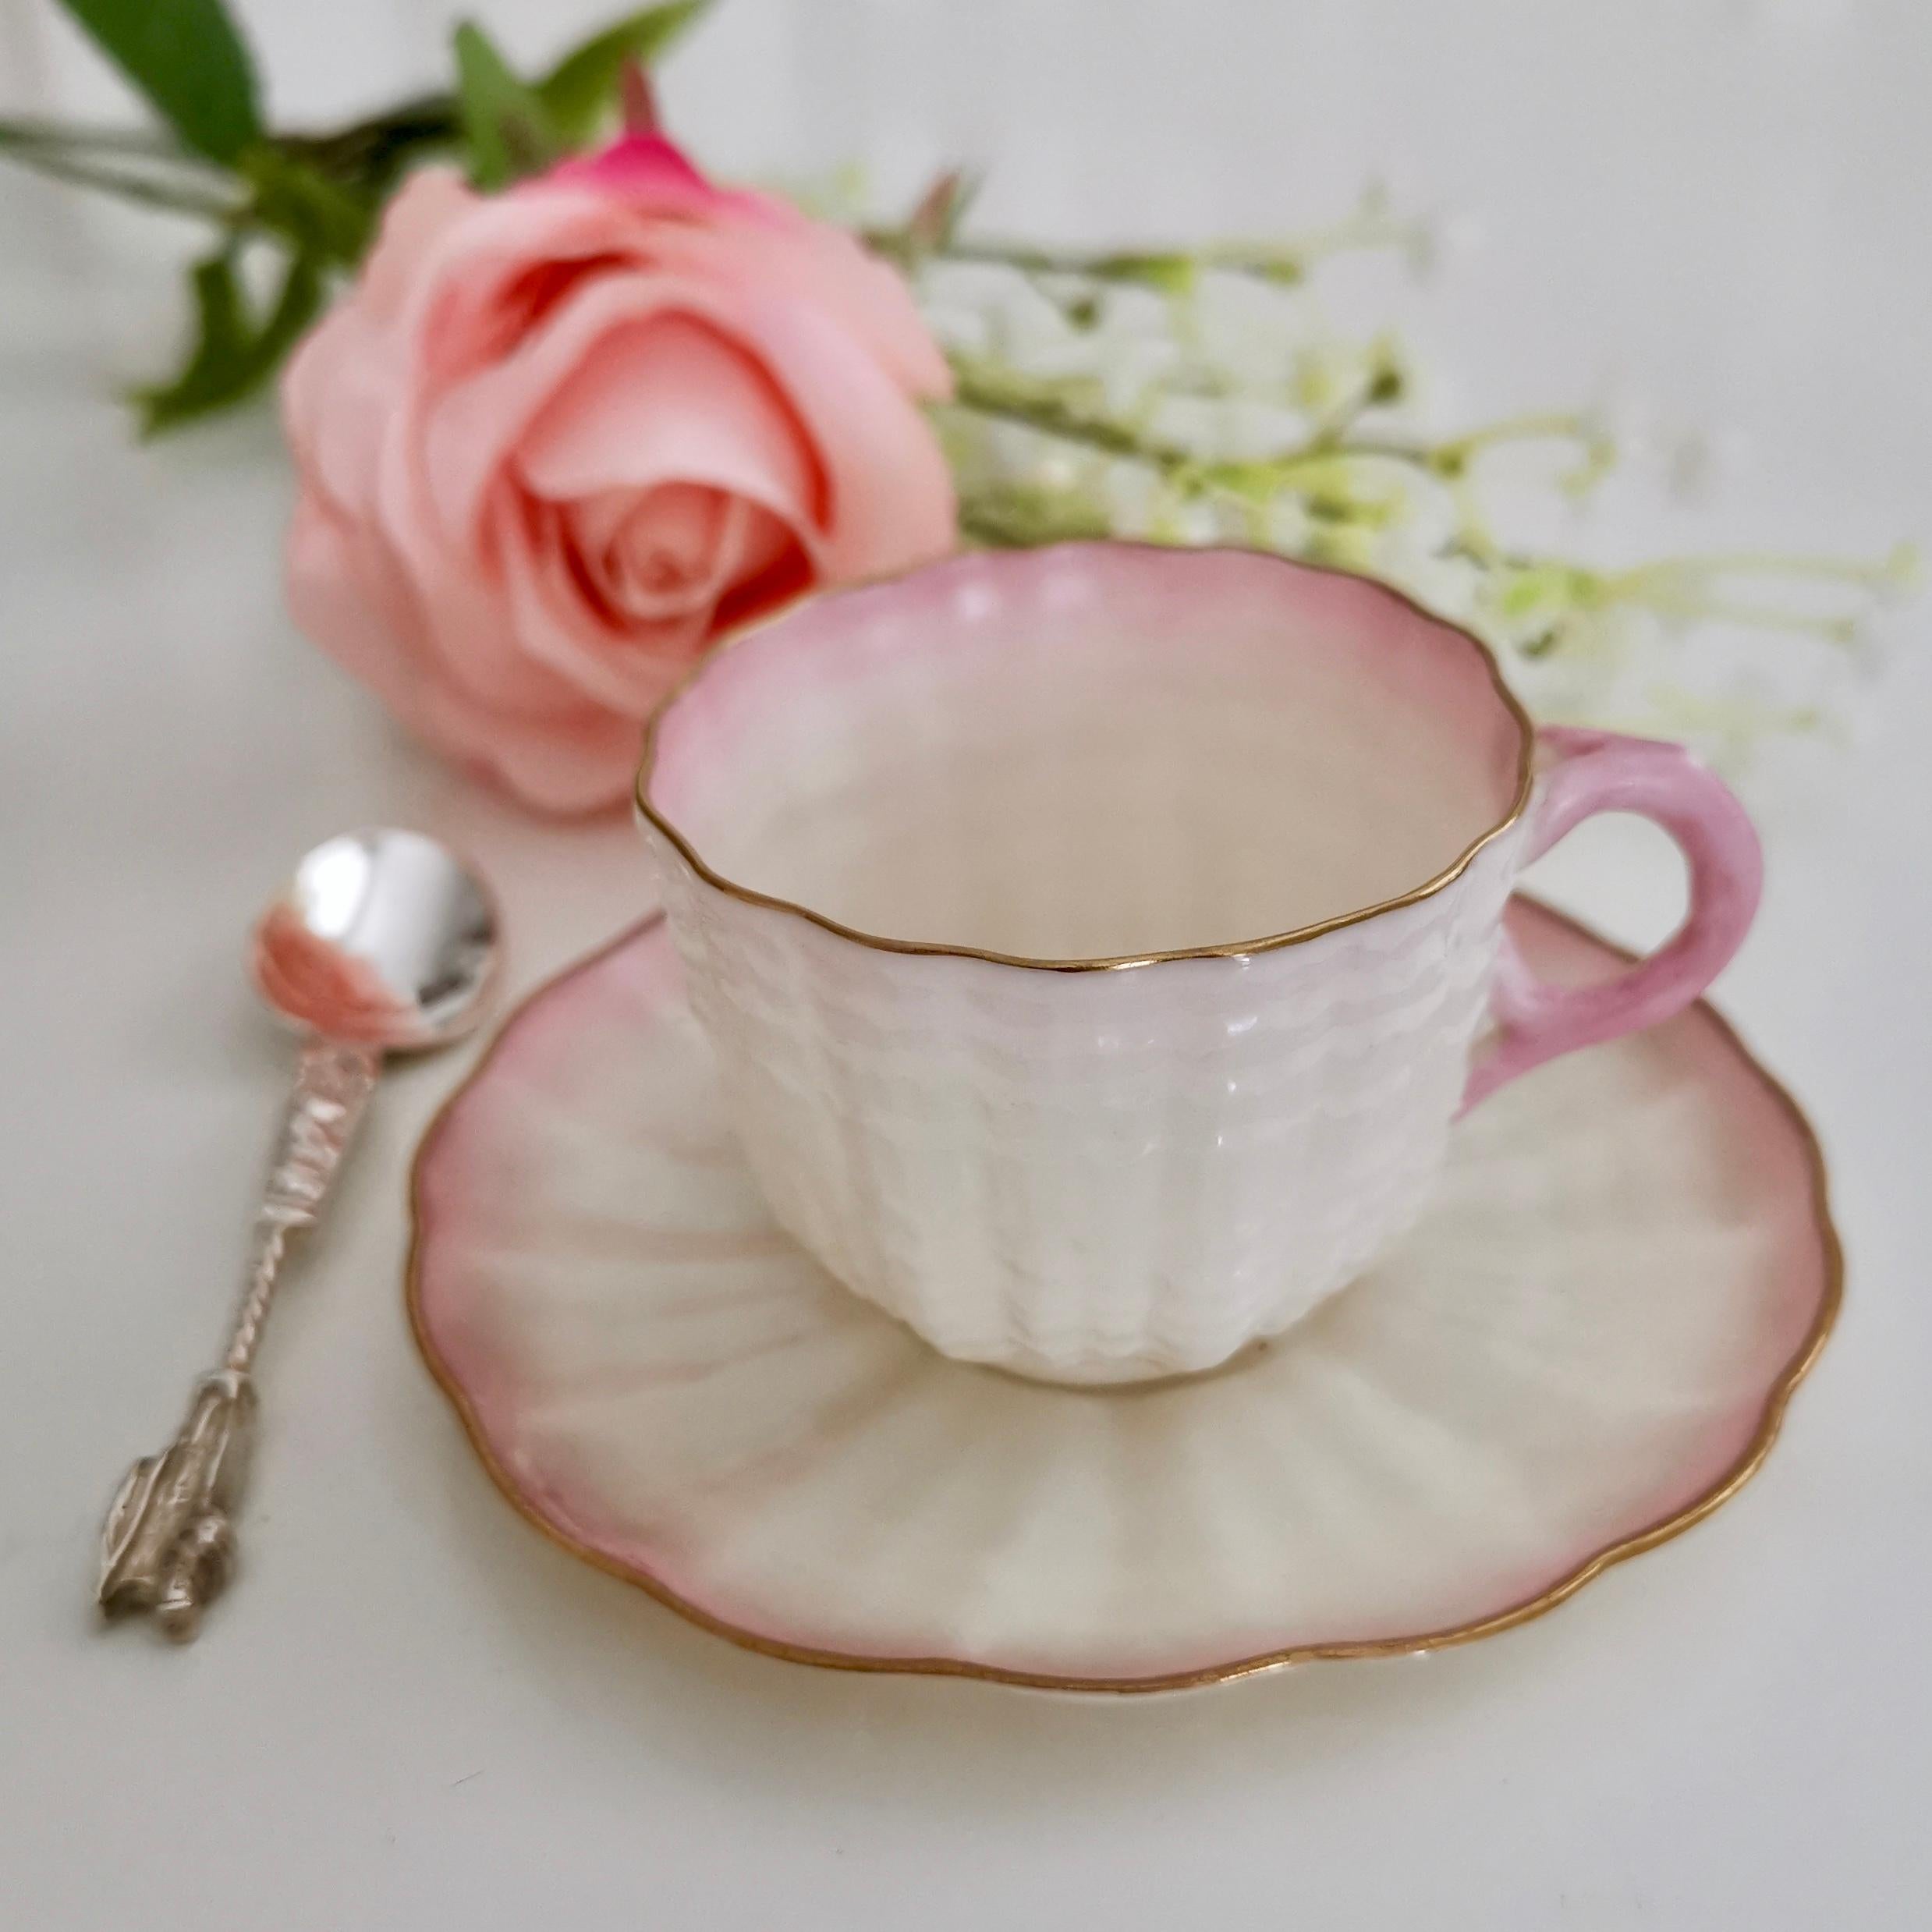 This is a beautiful Belleek demitasse cup and saucer in the pink Tridacna design with the 2nd Black Mark, which was used between 1891 and 1926. This cup is tiny; it holds a single espresso.

These demitasse cups are rare so this is a great